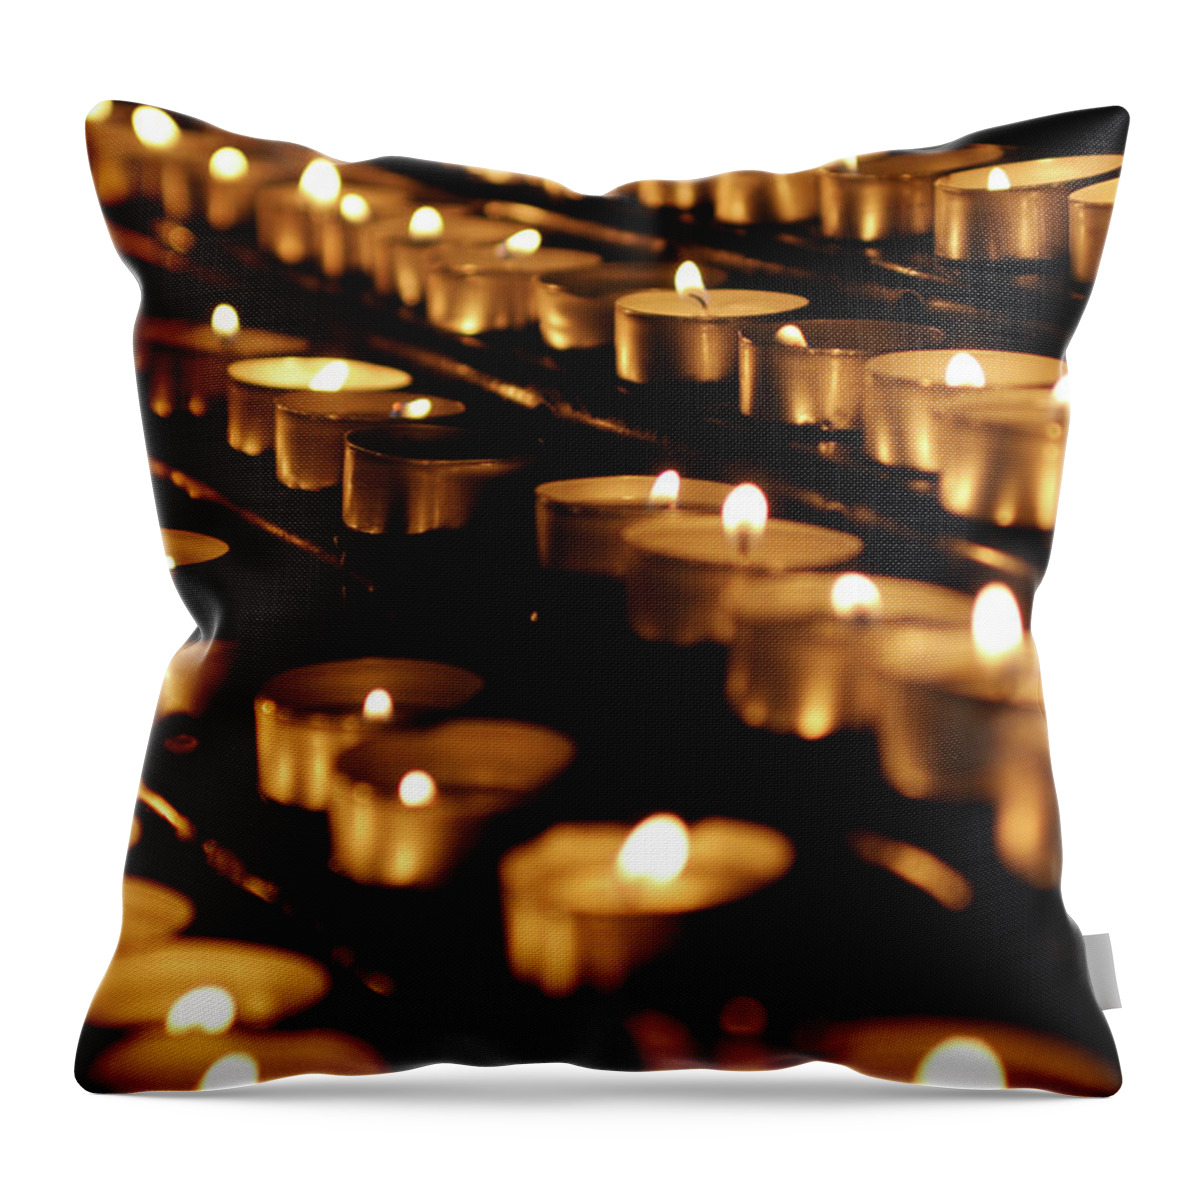 Gothic Style Throw Pillow featuring the photograph Candles by Aarstudio